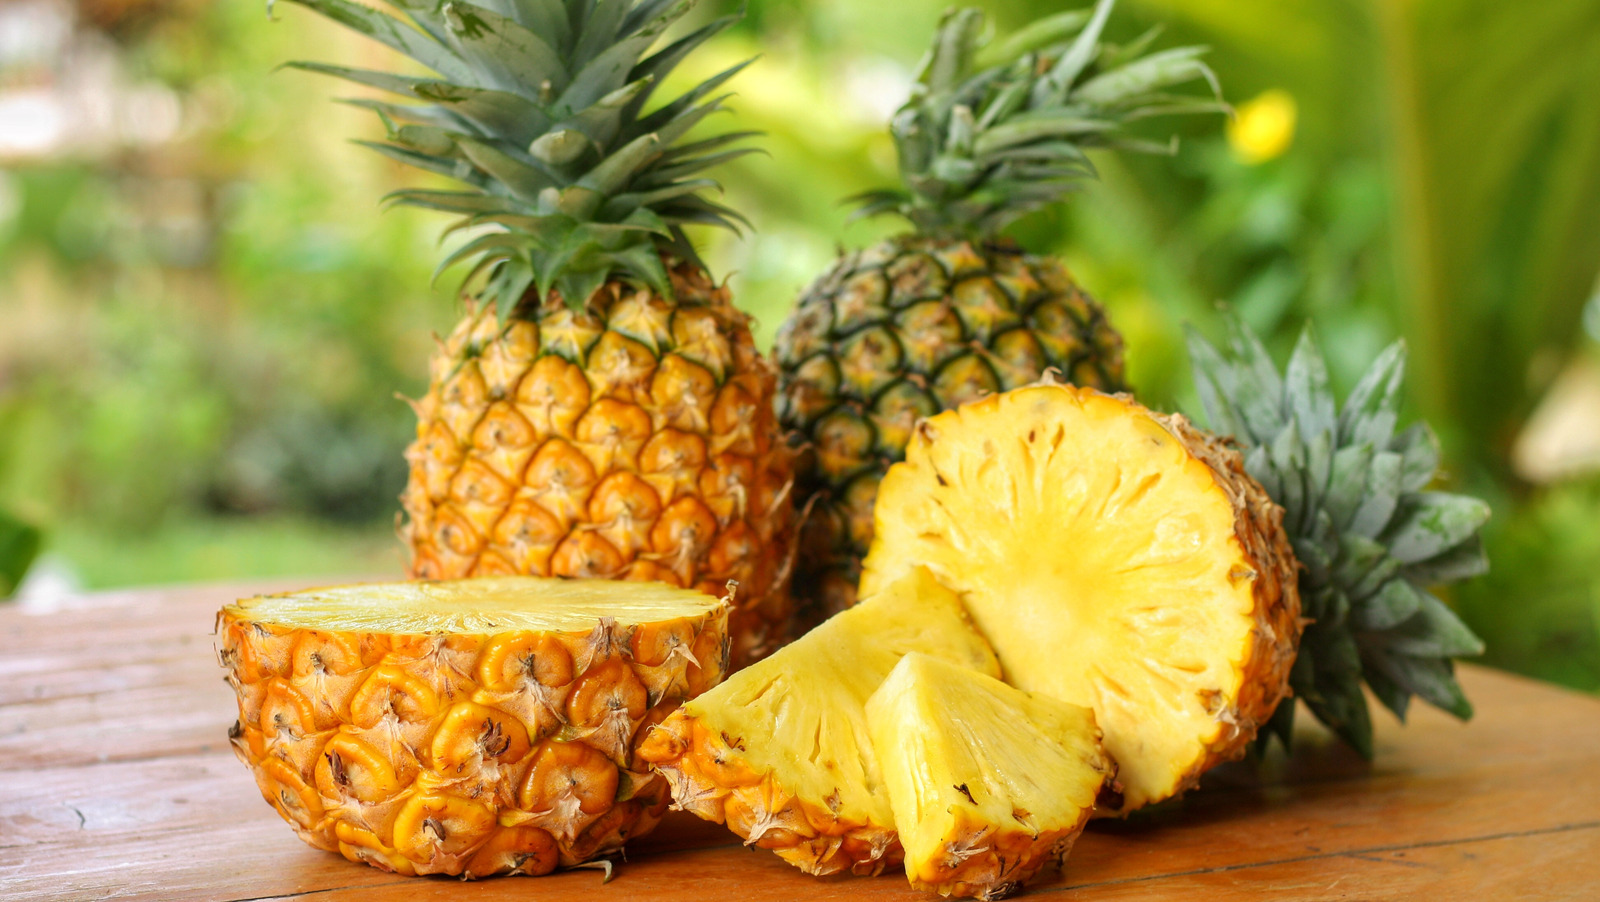 Pineapple: A Tropical Touch for Sweet and Savory Dishes - Food & Nutrition  Magazine